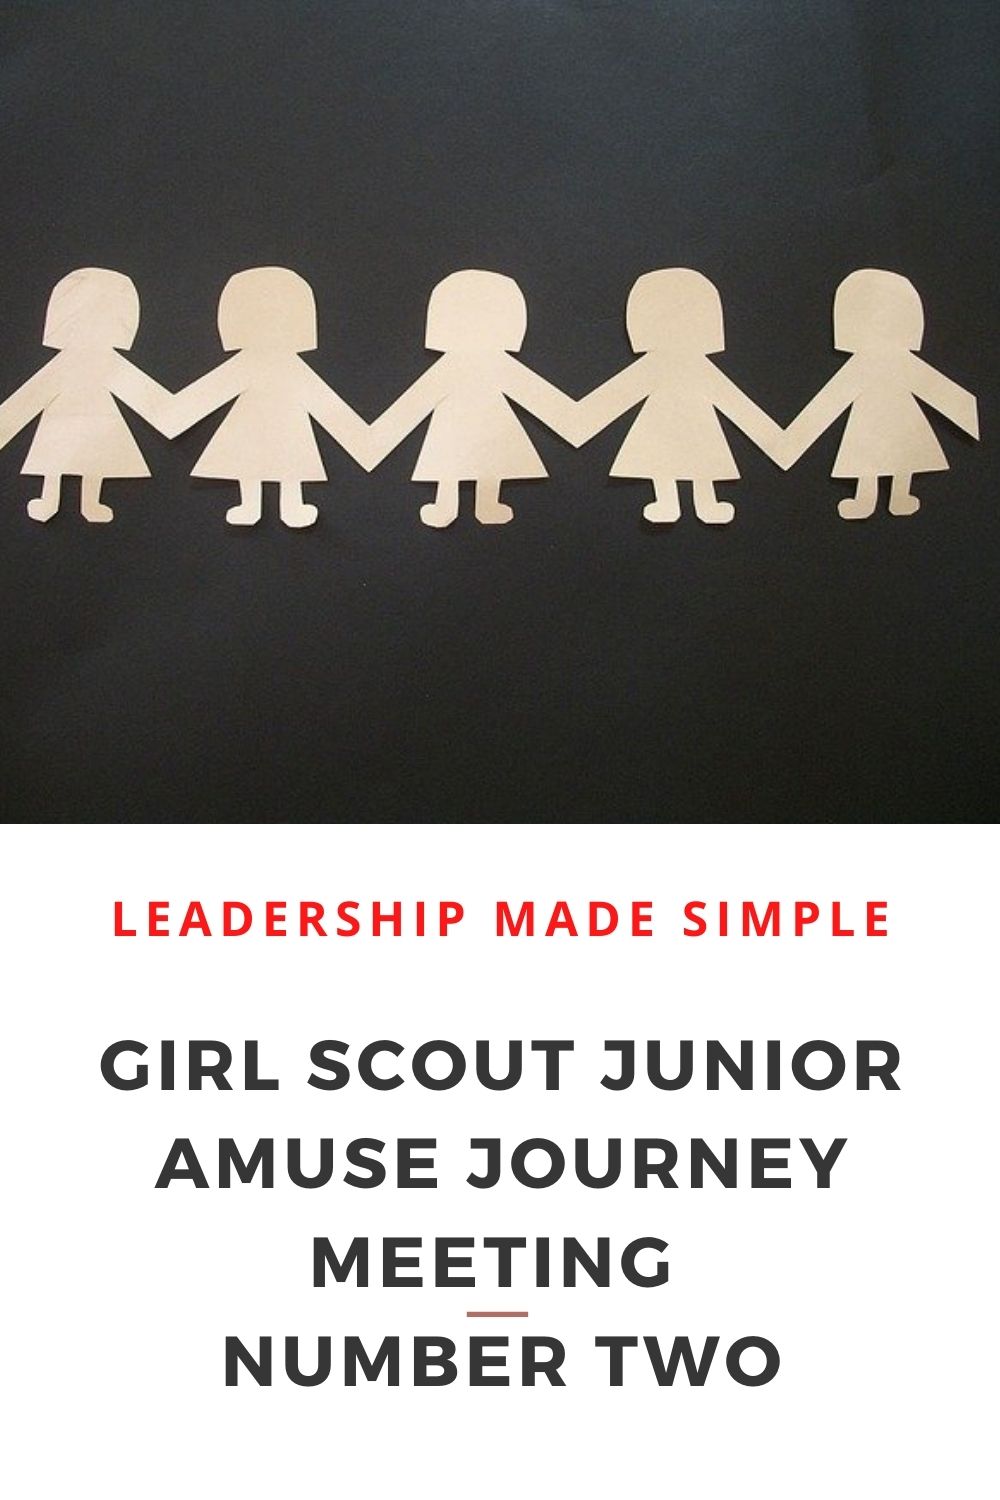 girl scout junior amuse journey requirements